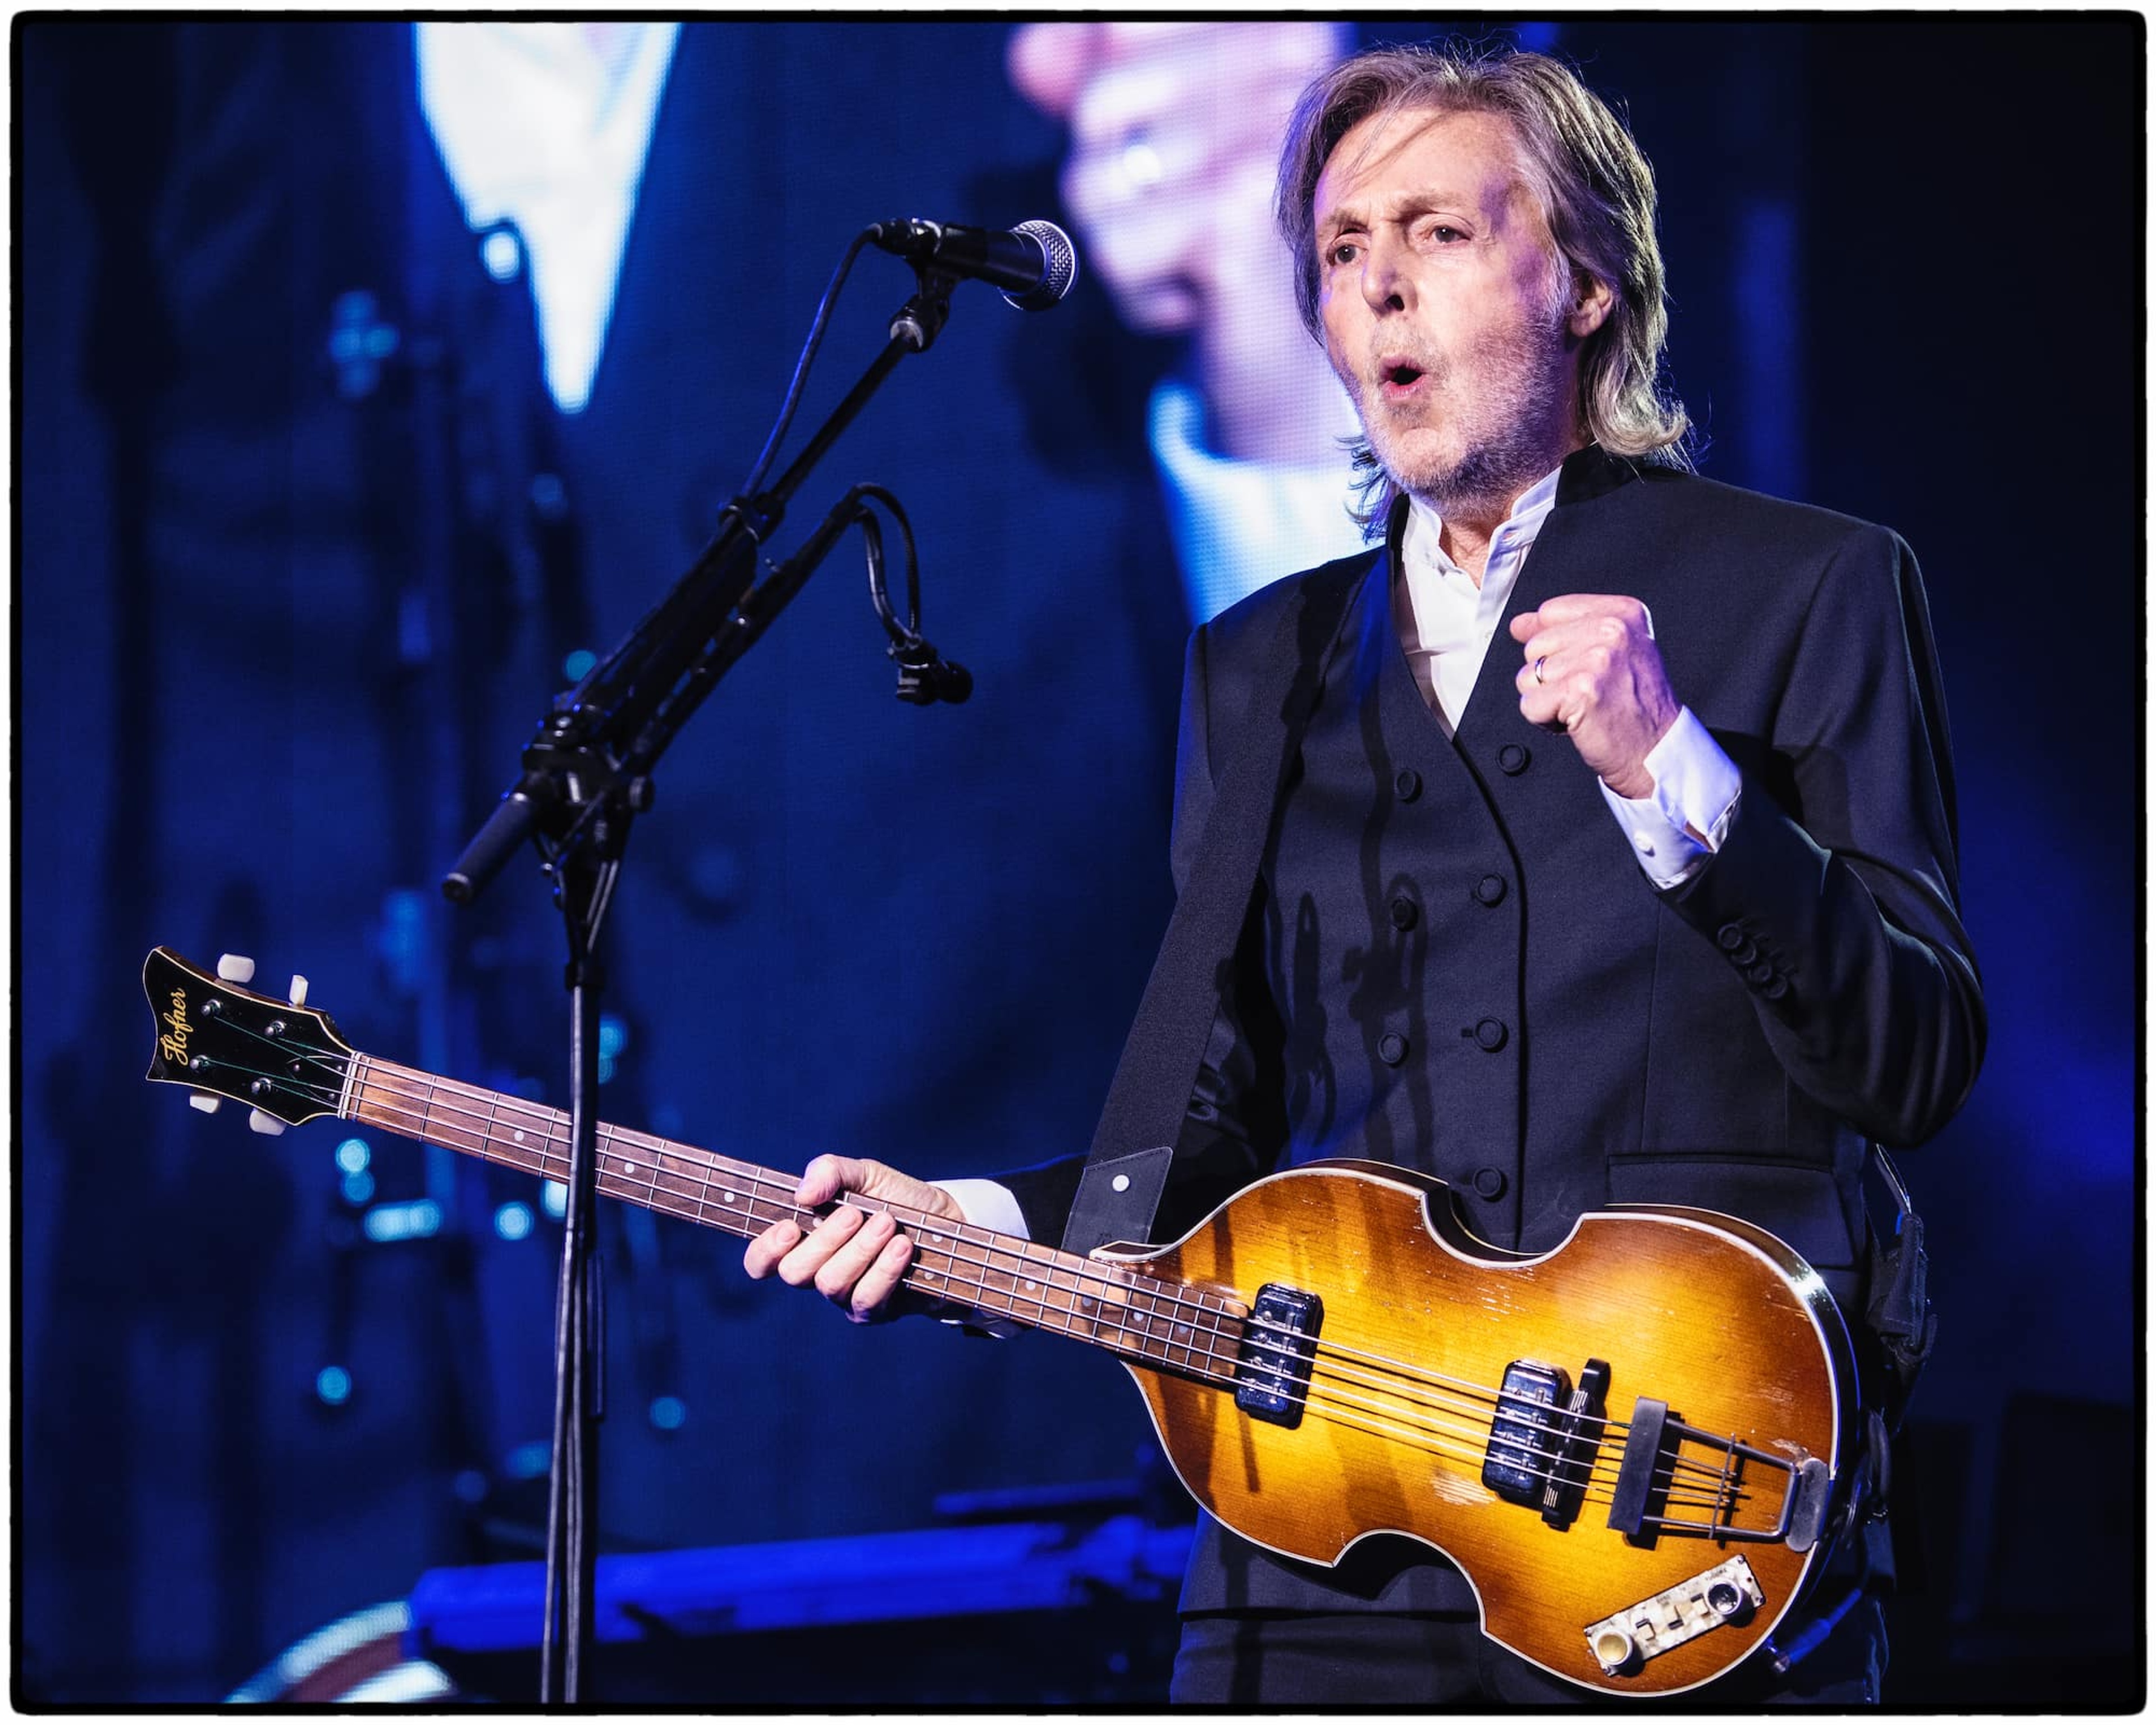 Photograph of Paul McCartney during the opening night of the 2023 GOT BACK tour in Adelaide